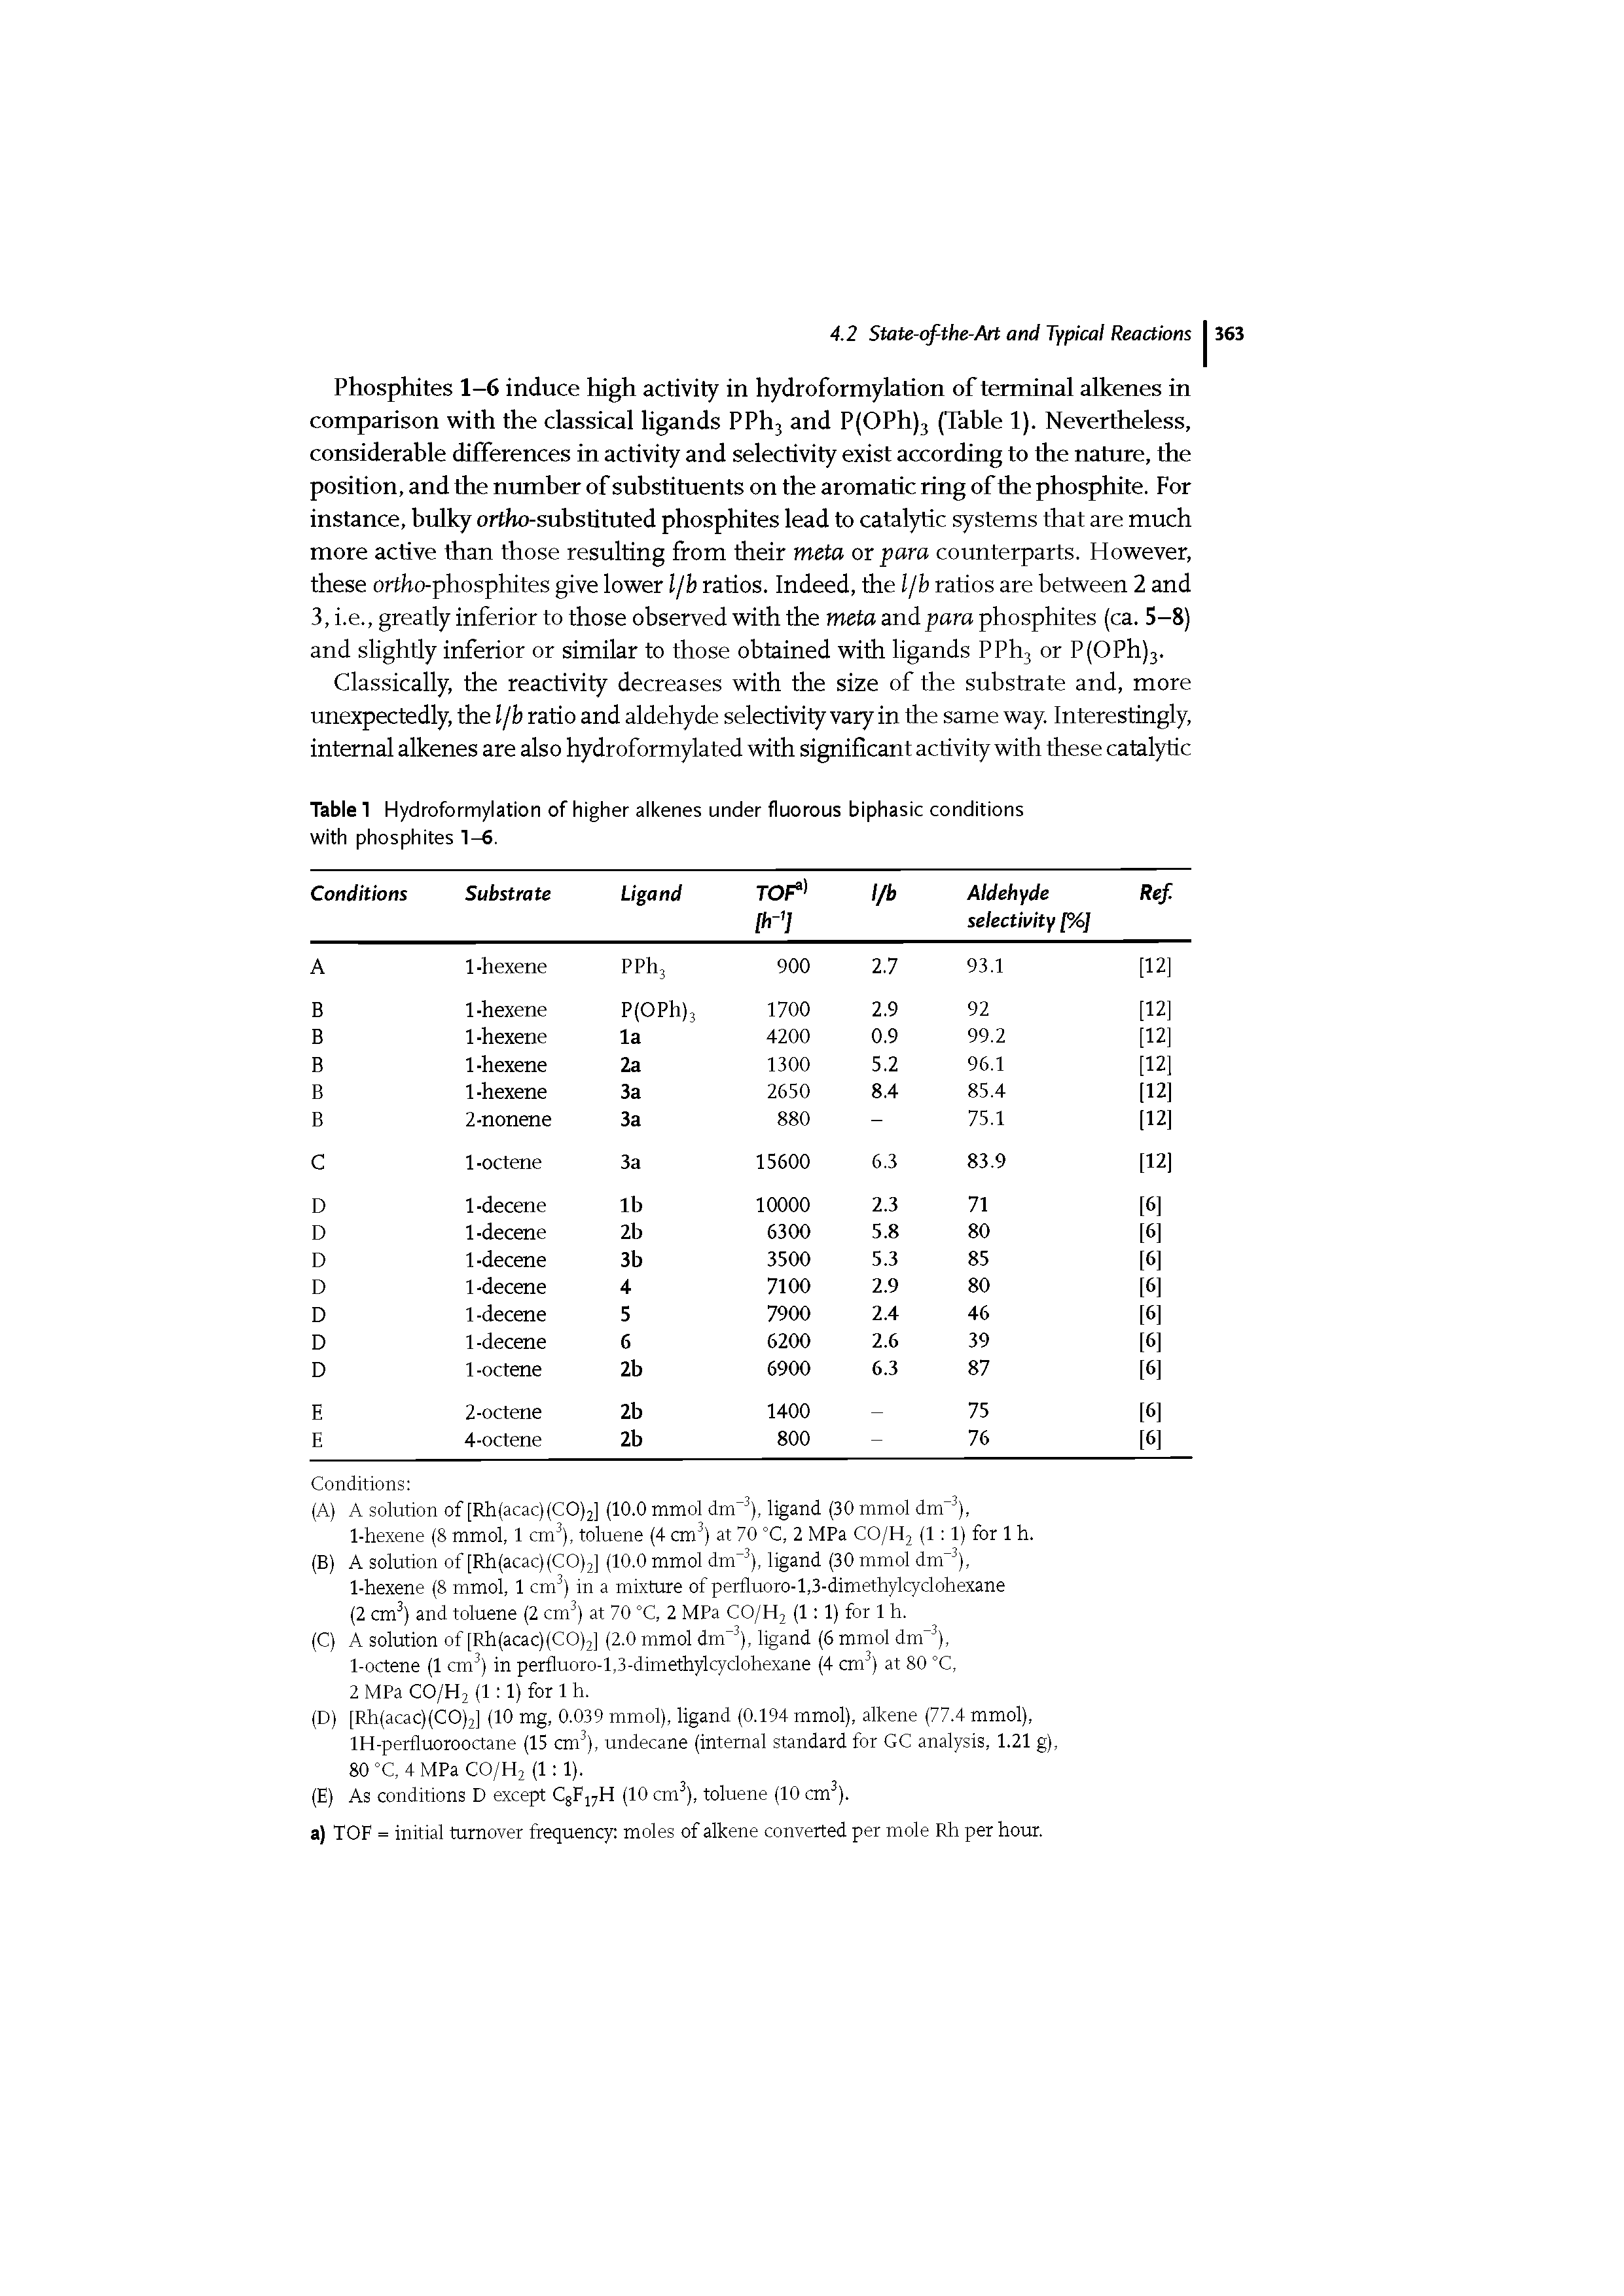 Table 1 Hydroformylation of higher aikenes under fluorous biphasic conditions with phosphites 1-6.